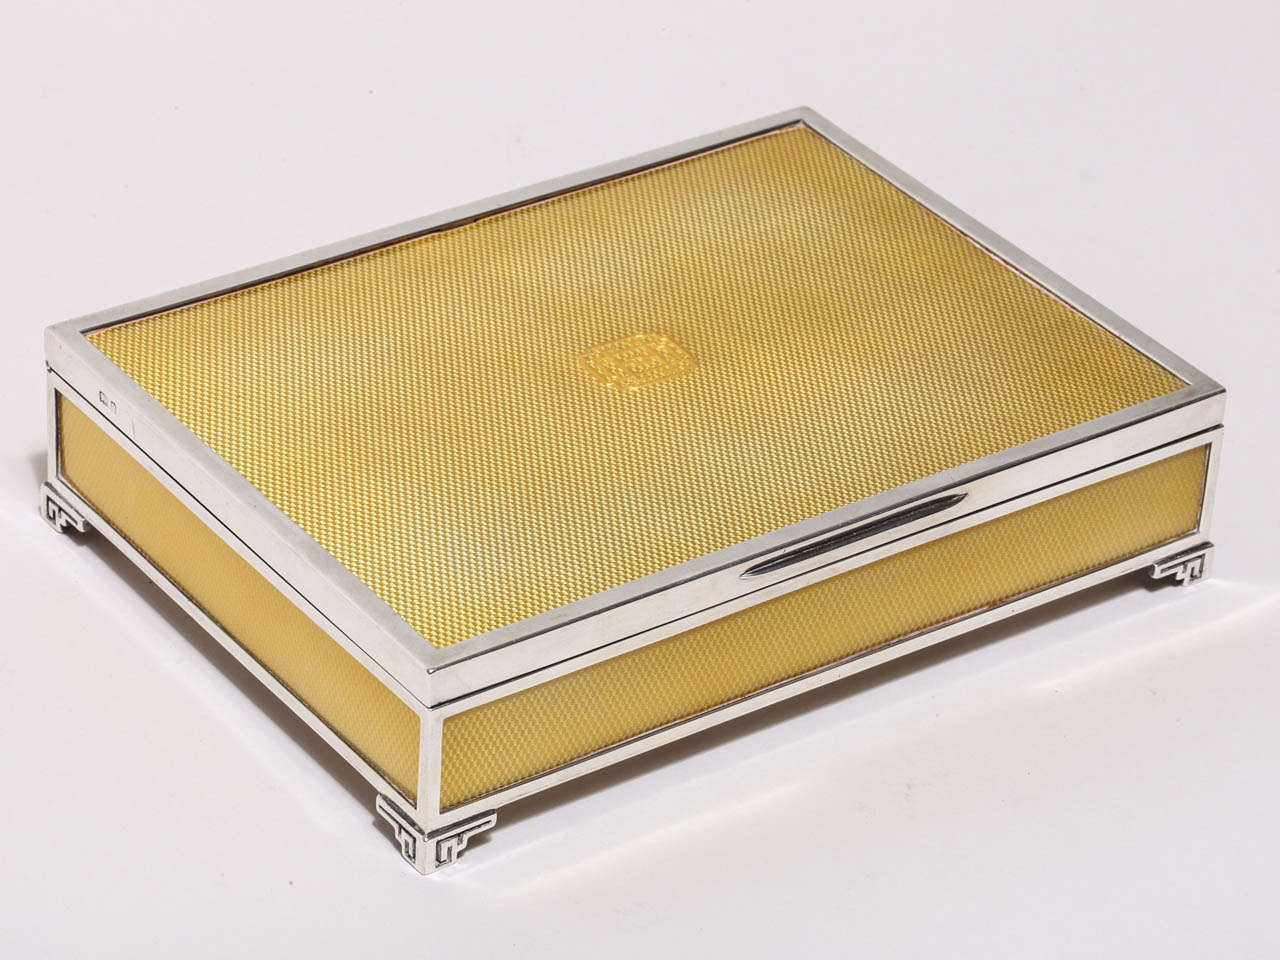 Rectangular box with engine-turned cover and sides under translucent yellow enamel, the cover incorporating a monogram, on bracket feet, gilt interior.
Hallmarks: for 925 silver/ London/ 1929 J.C. (mark of Jacques Cartier)

65.60 ozs. gross.